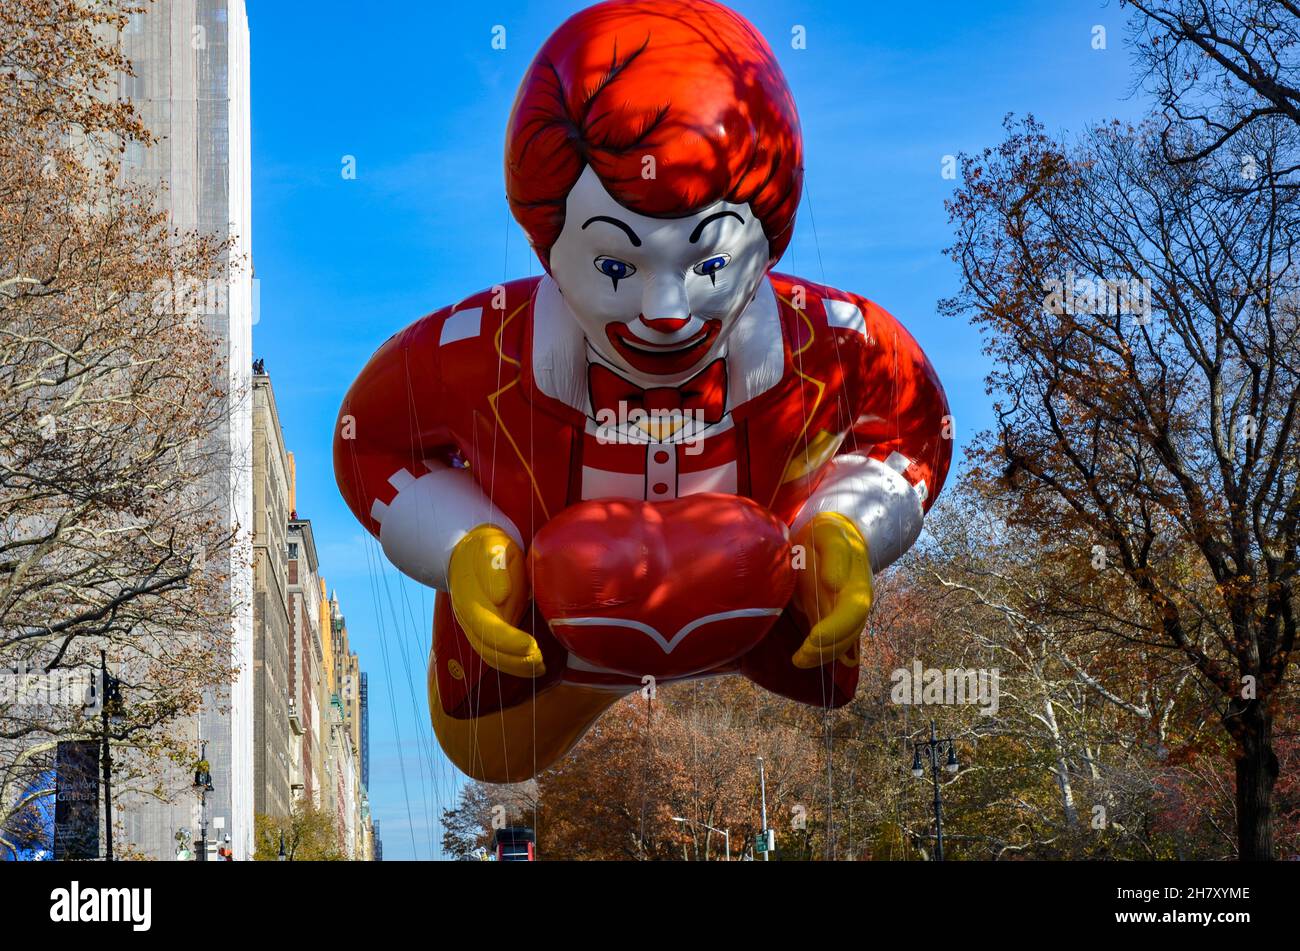 New York, United States. 25th Nov, 2021. Ronald McDonald characters are seen marching over Sixth Avenue during the 95th annual Macy's Thanksgiving Day Parade in New York City on November 25, 2021. (Photo by Ryan Rahman/Pacific Press) Credit: Pacific Press Media Production Corp./Alamy Live News Stock Photo